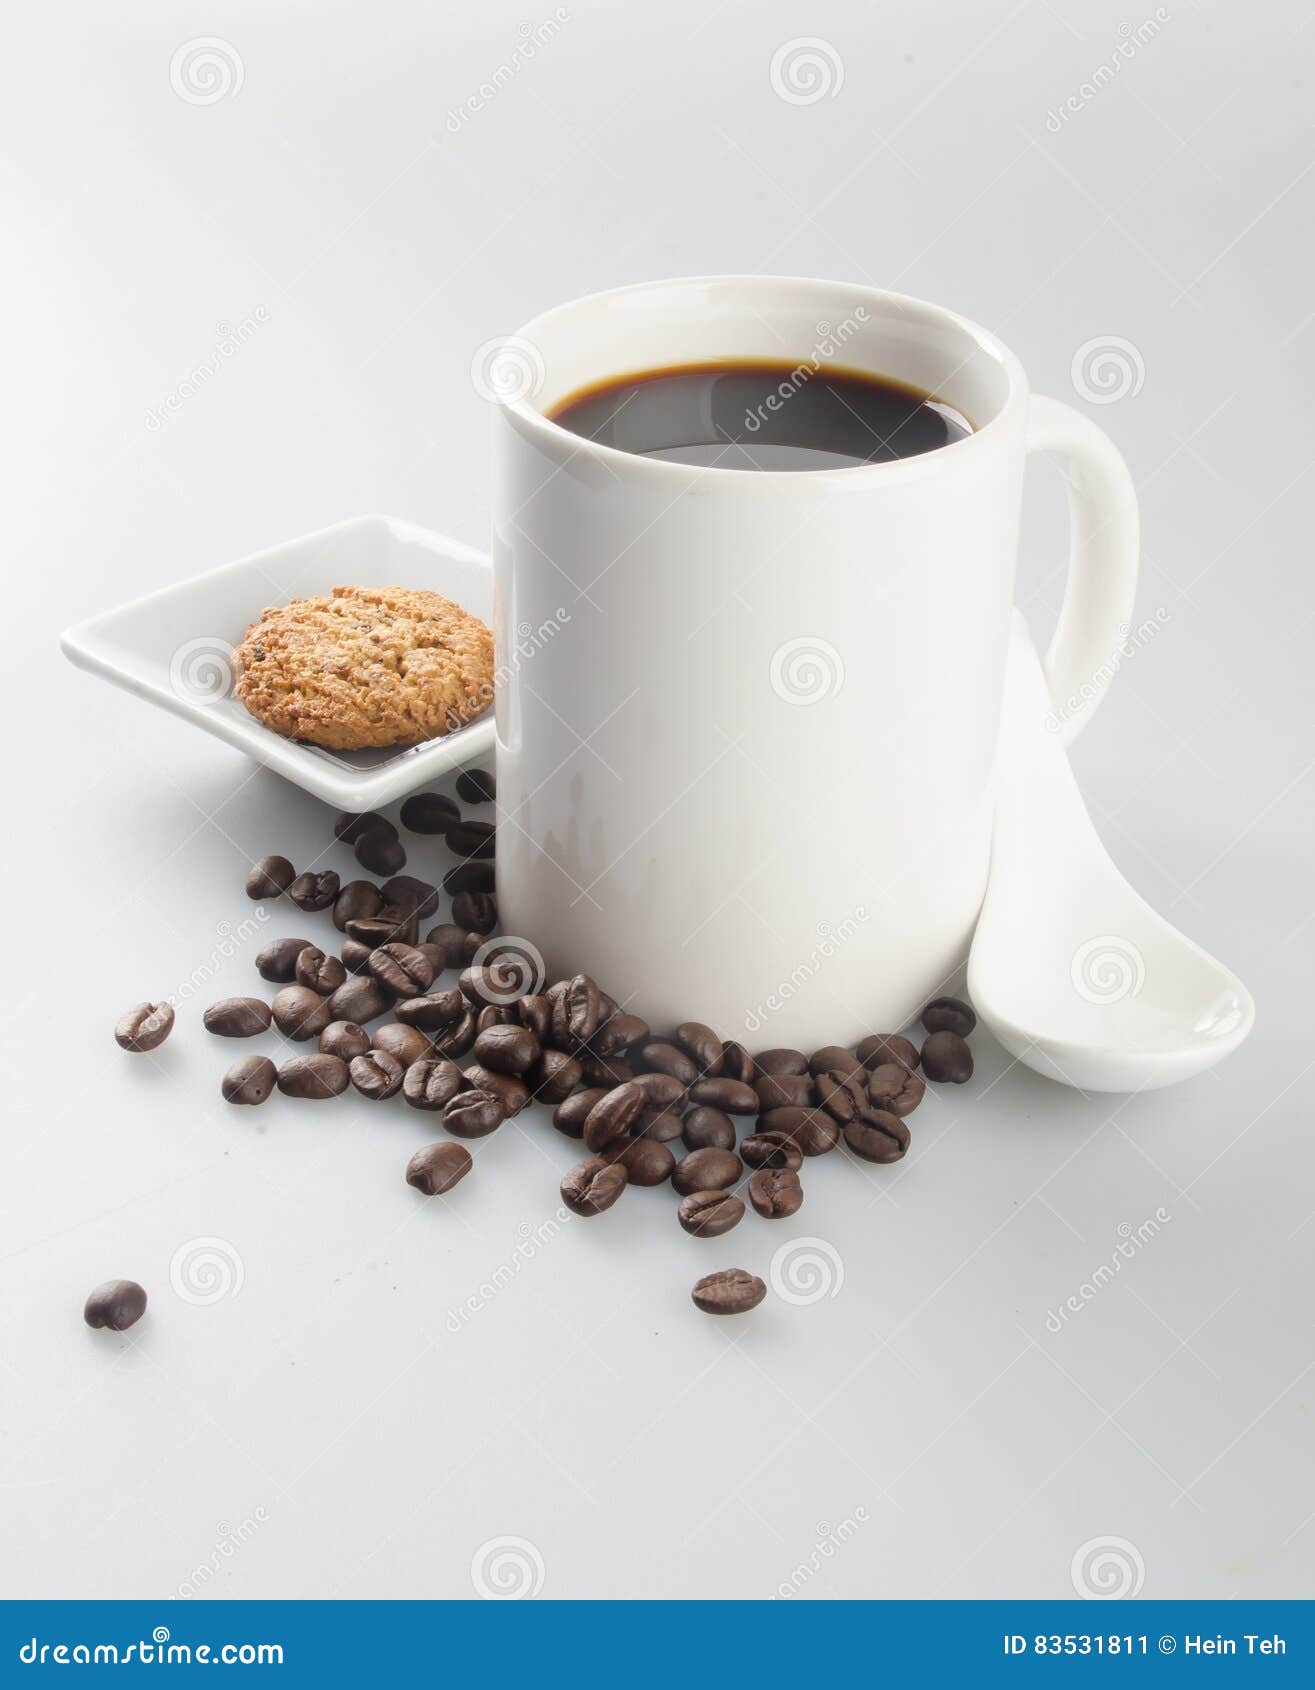 Coffee or Cup of Coffee and Cookie on Background. Stock Image - Image ...